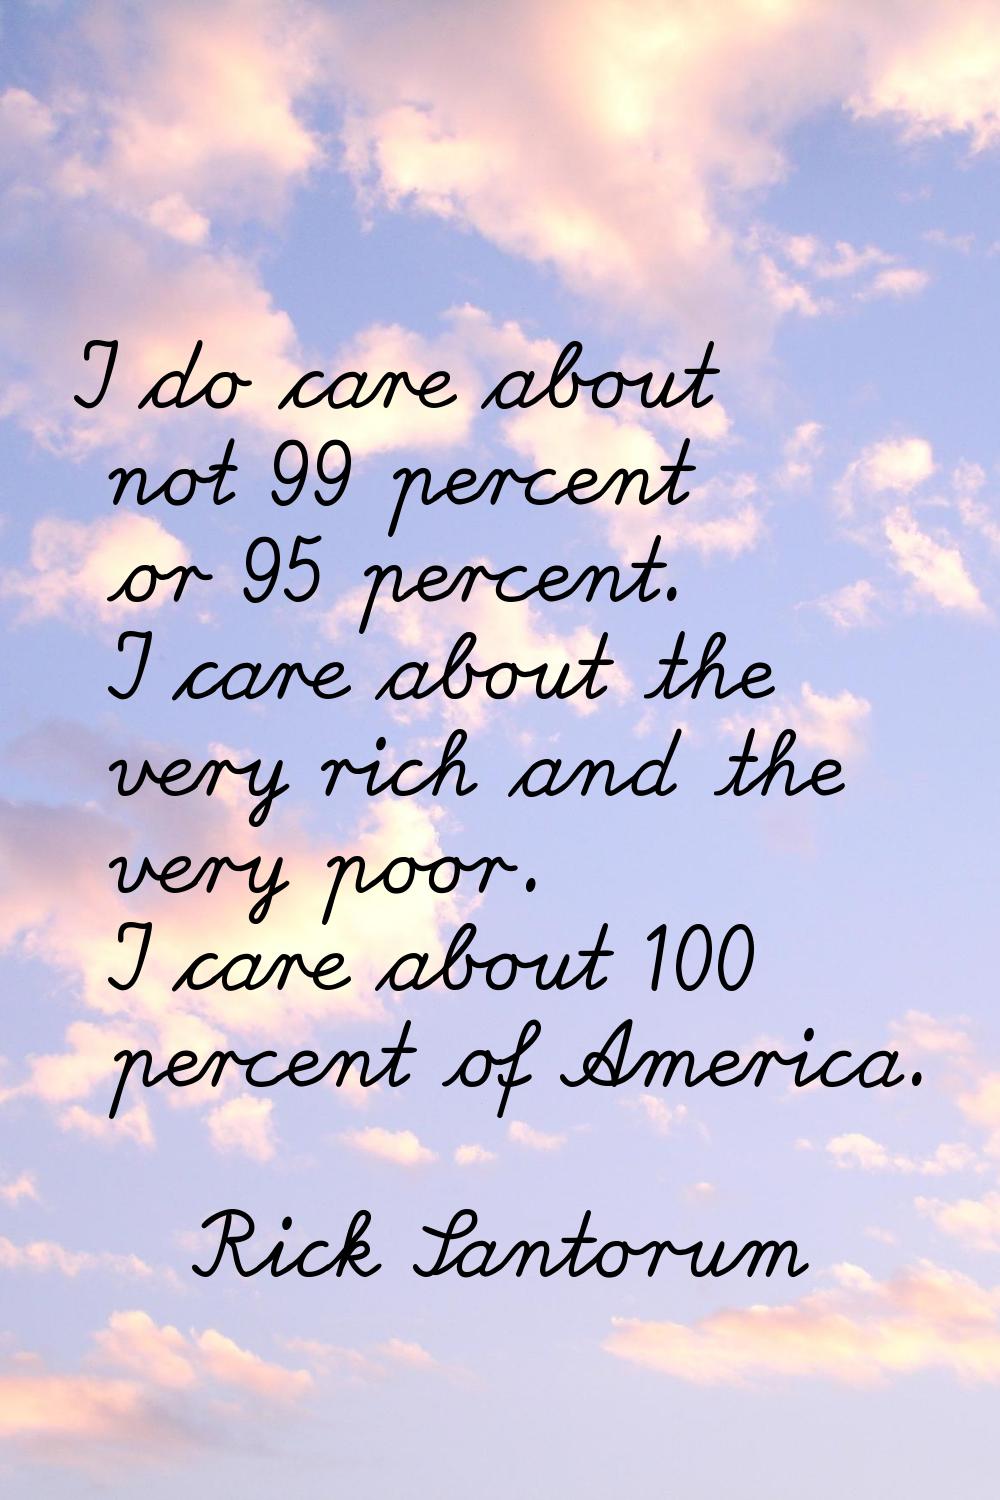 I do care about not 99 percent or 95 percent. I care about the very rich and the very poor. I care 